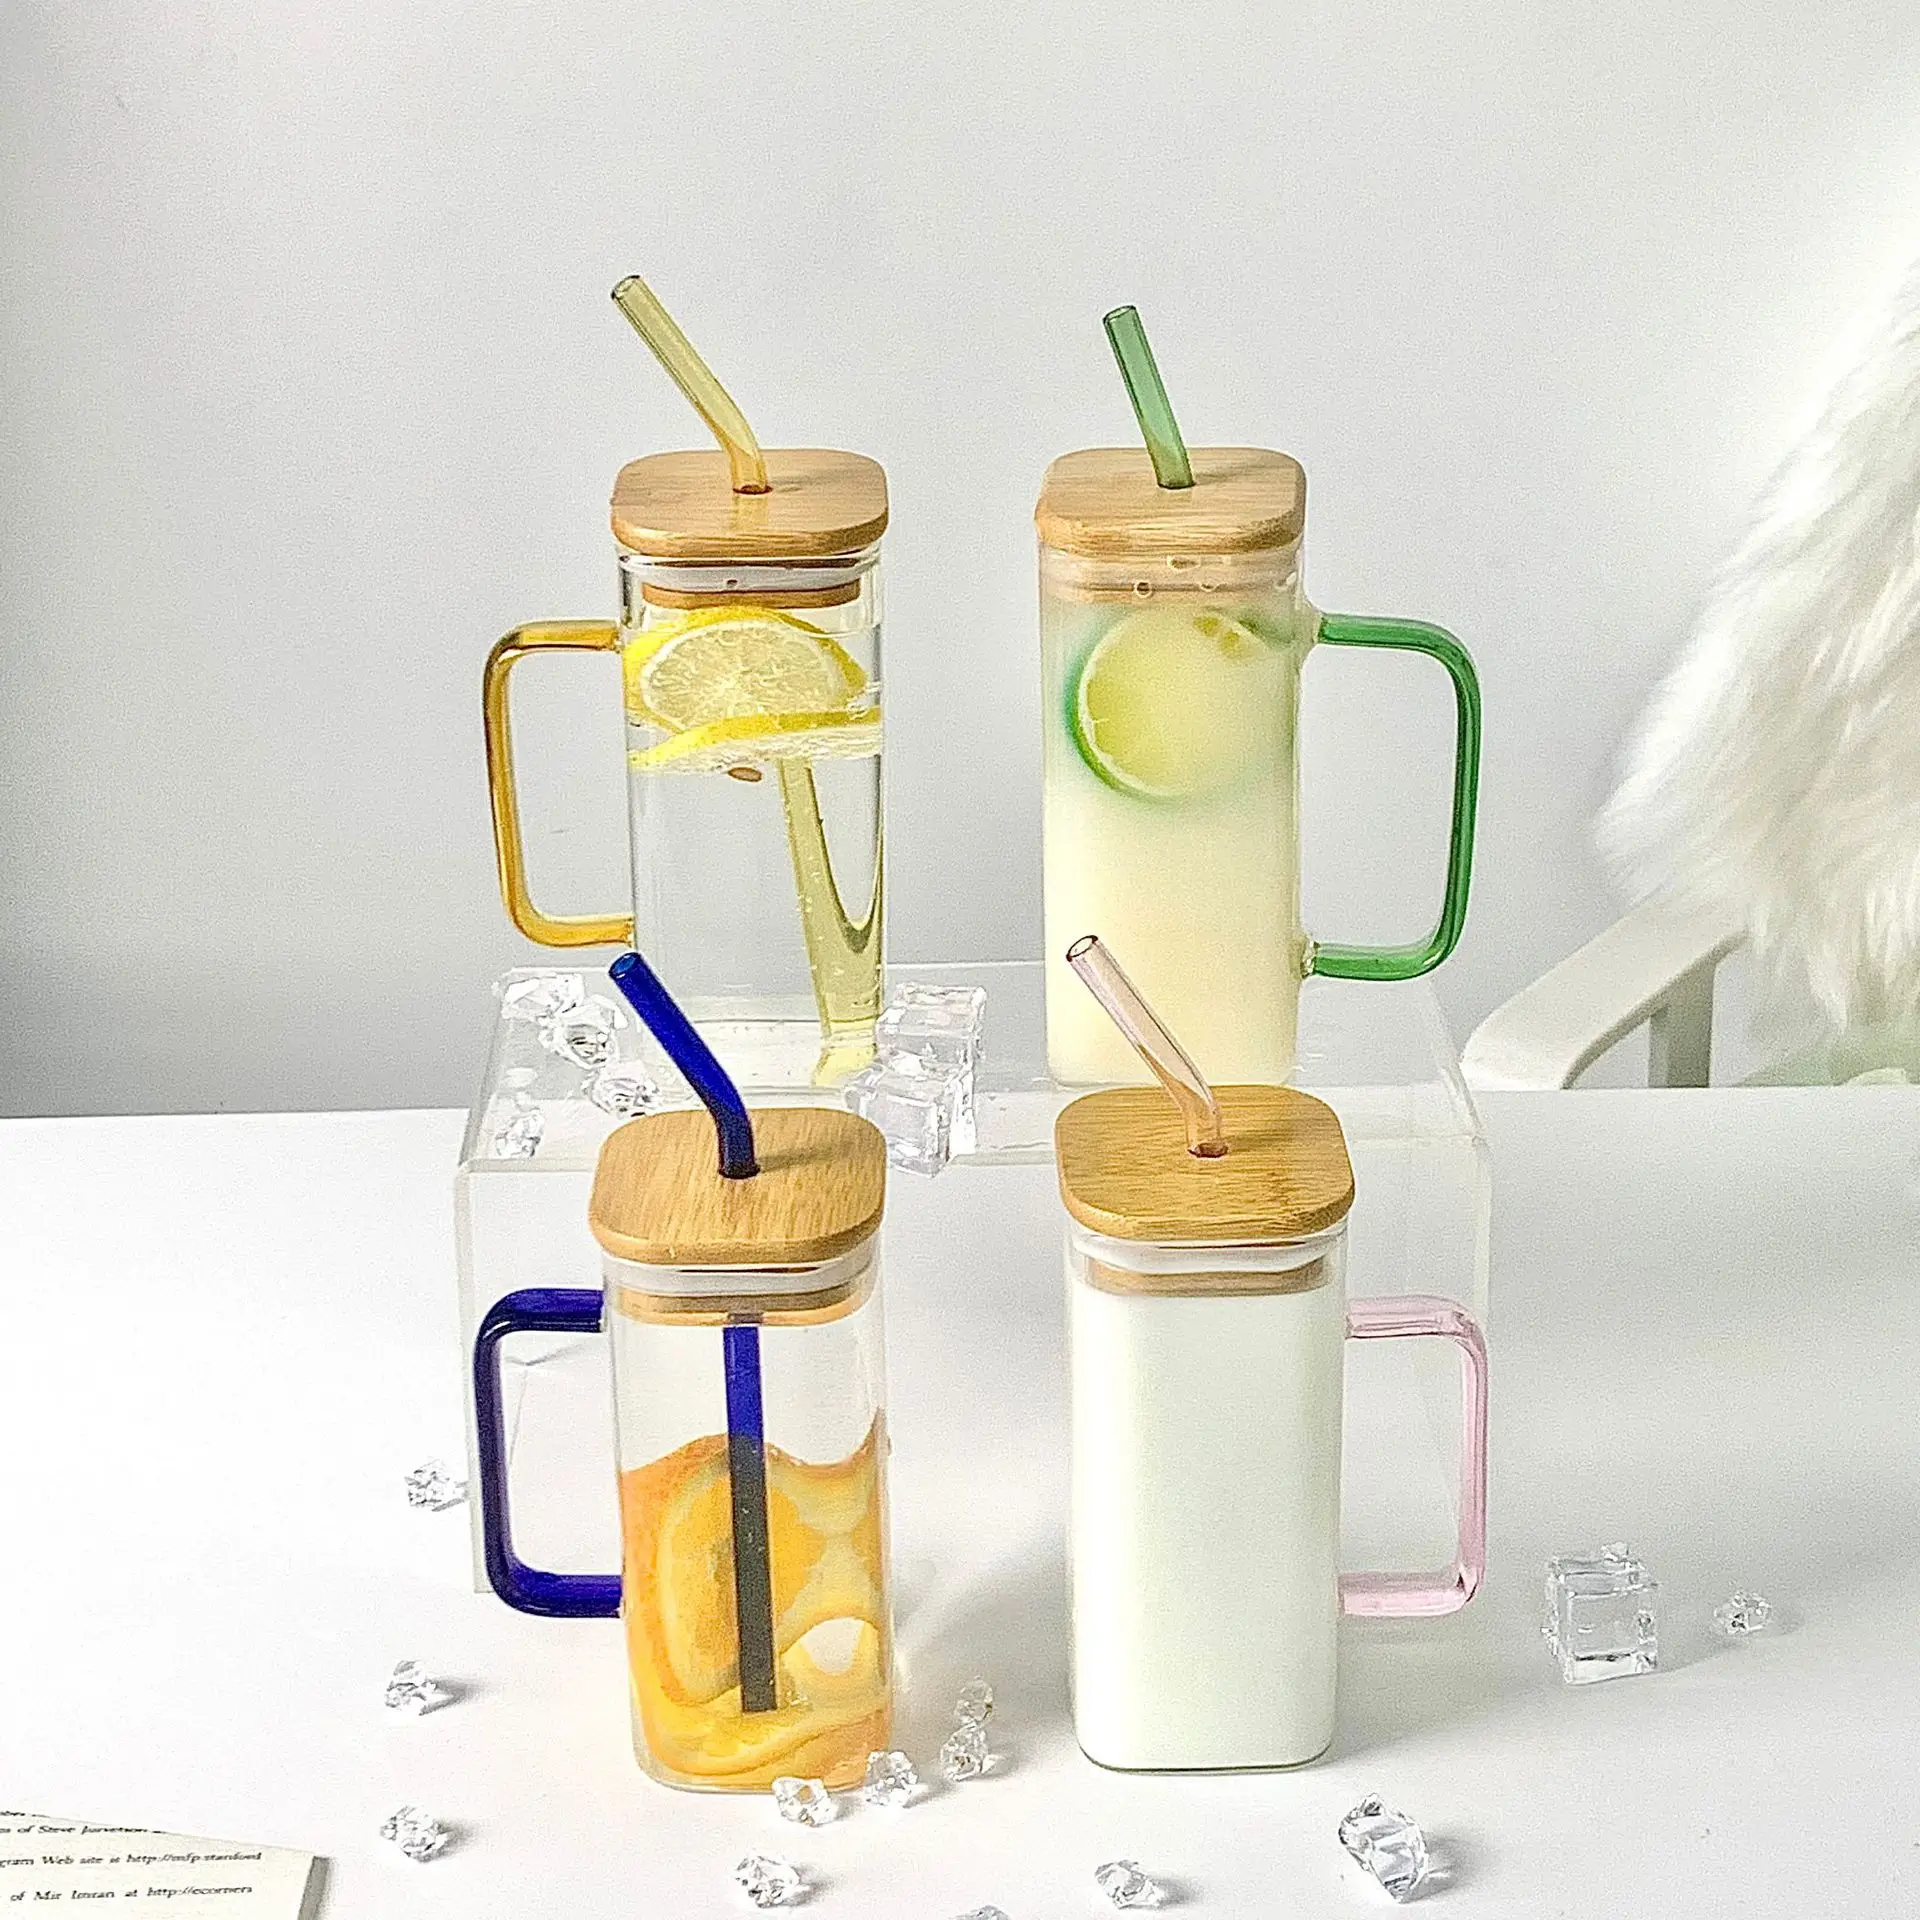 1pc Square Glass Cup With Handle & Straw, Ins Style, Heat